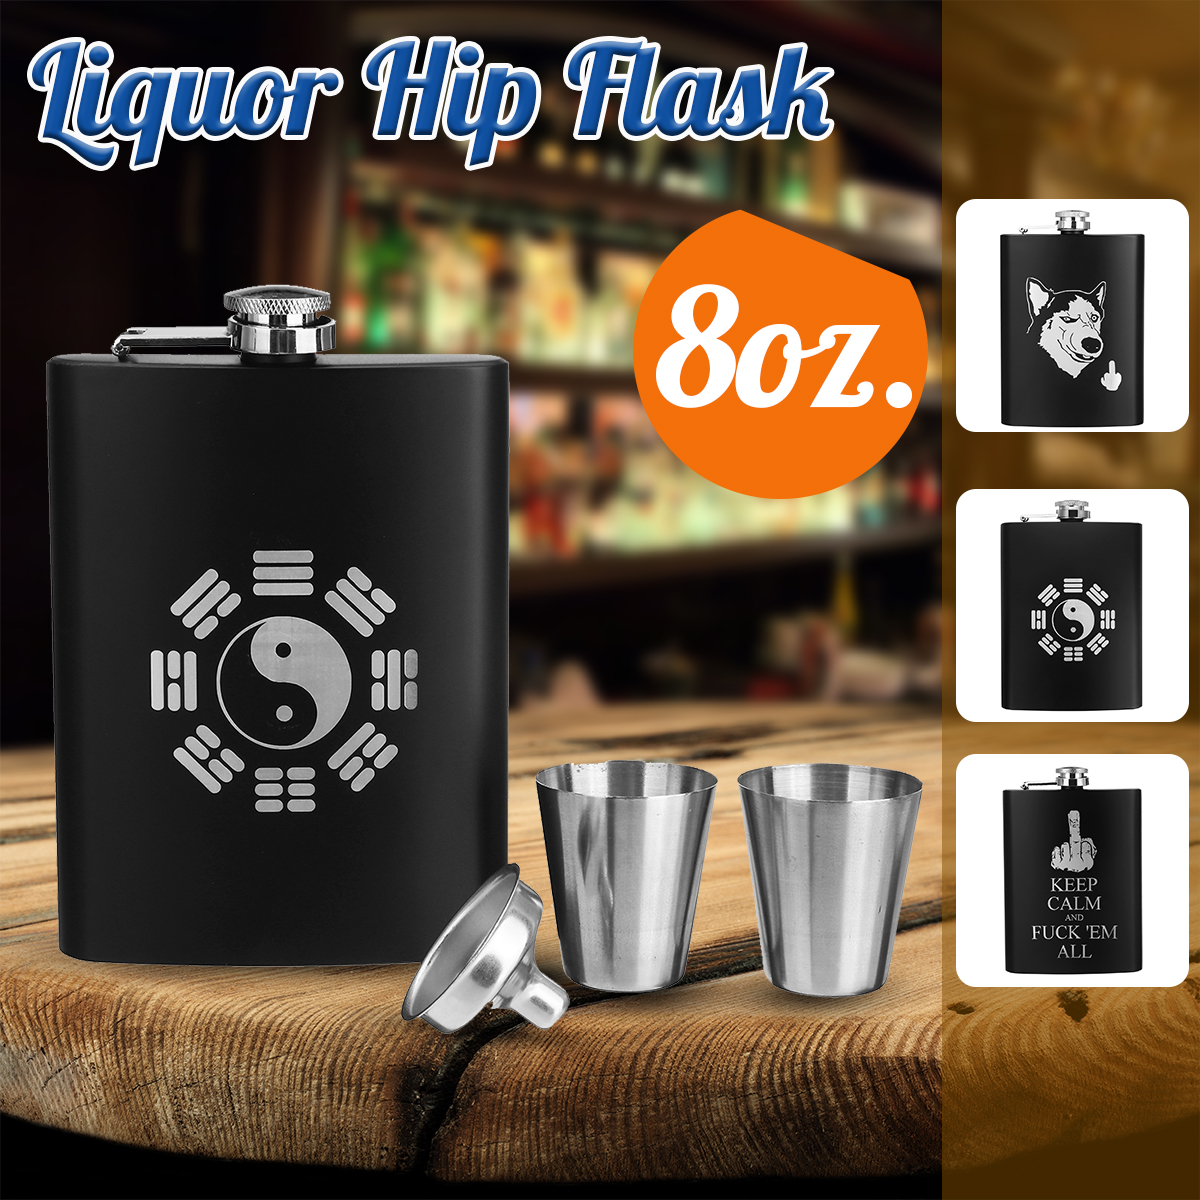 8oz-Stainless-Steel-Pocket-Liquor-Hip-Flask-Drink-Flagon-with-Funnel-1582092-1